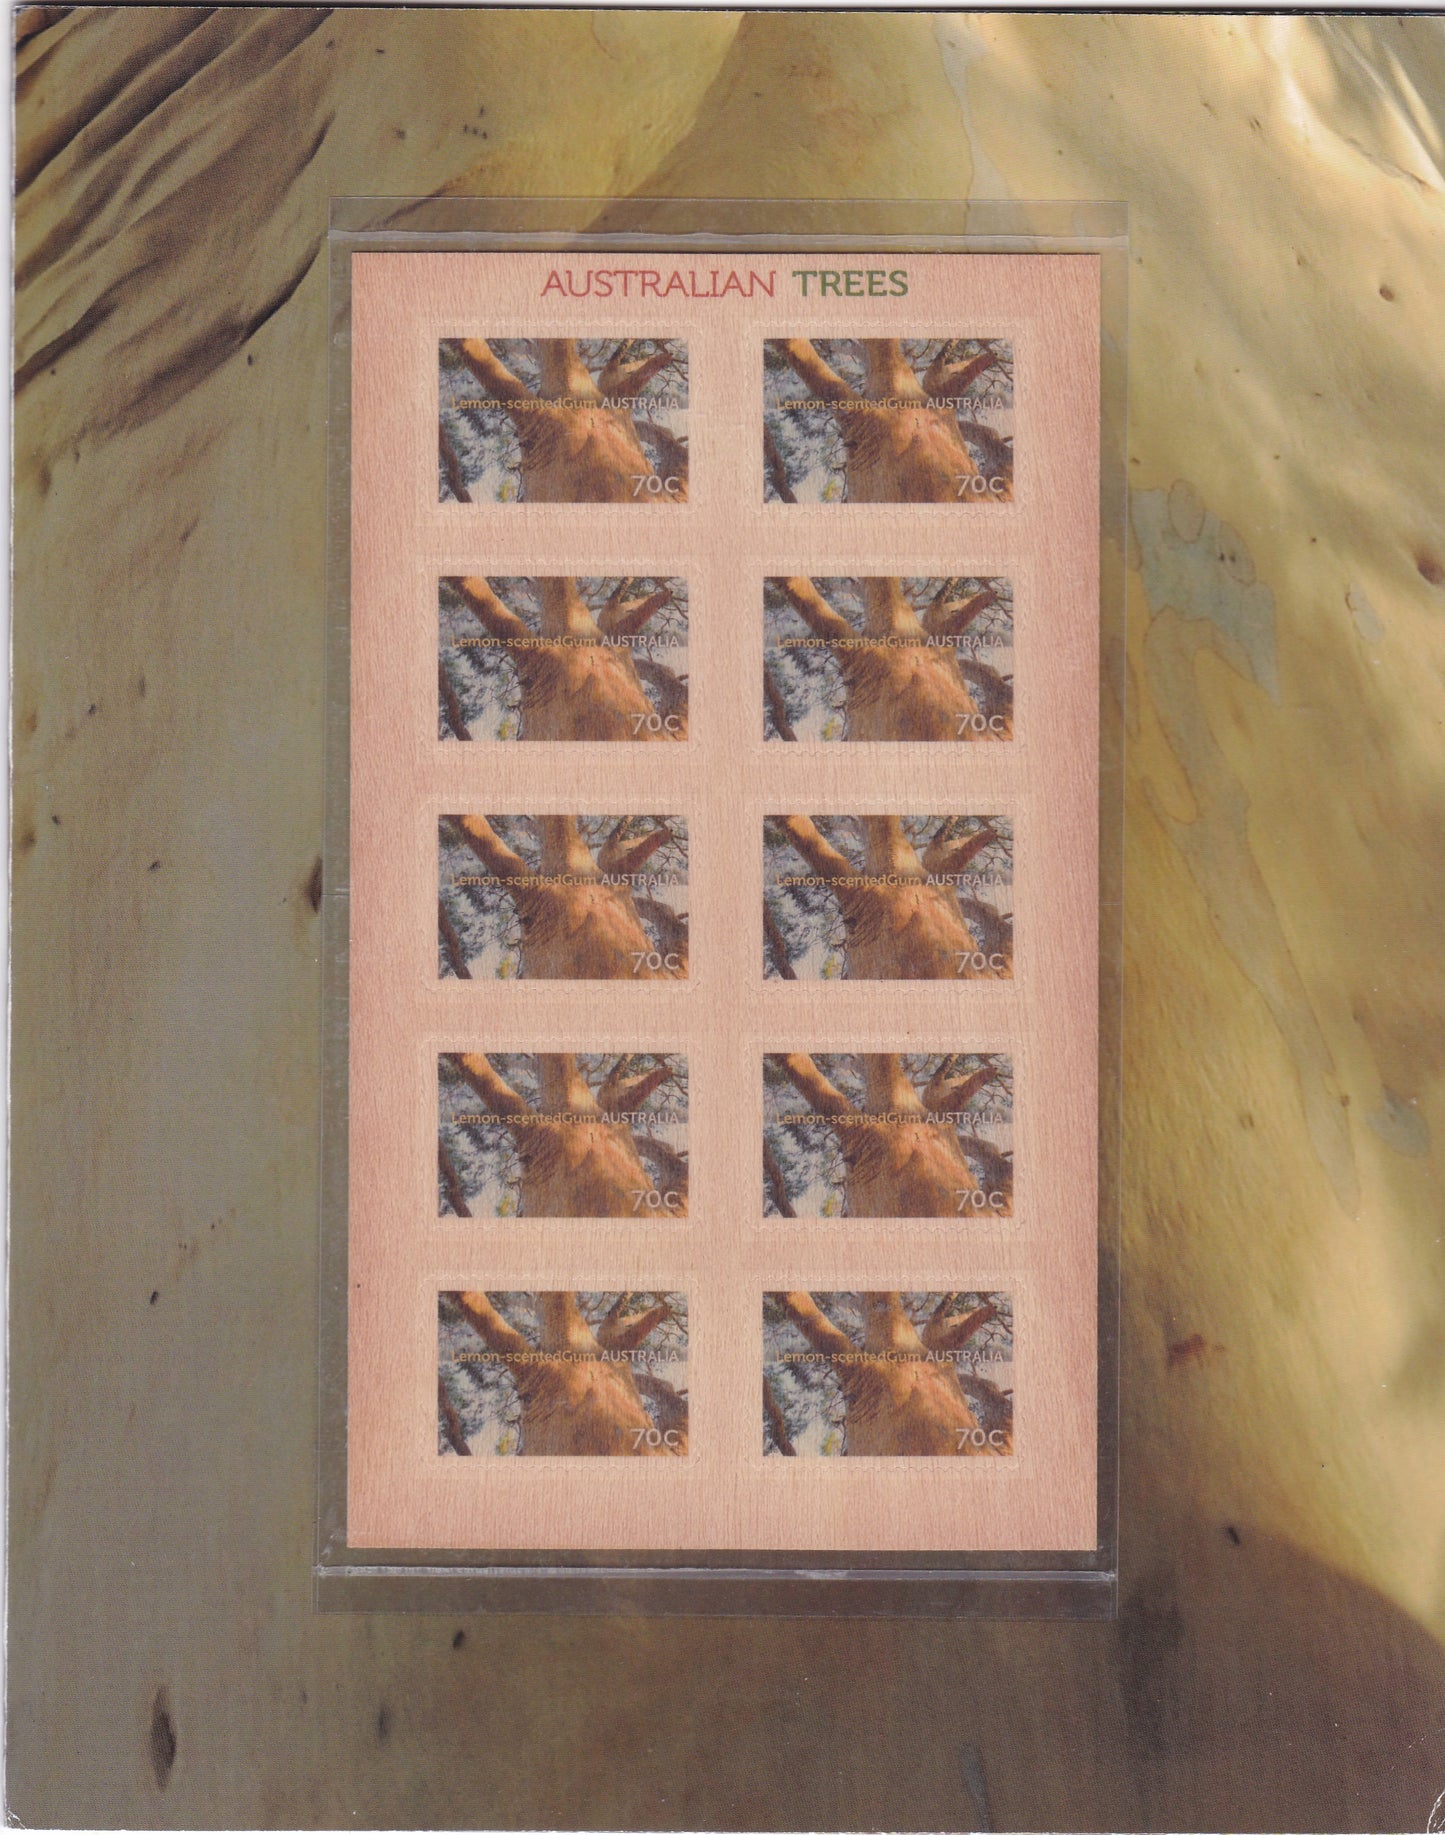 Australia-Unusual wood stamp sheet with normal sheet in special folder.